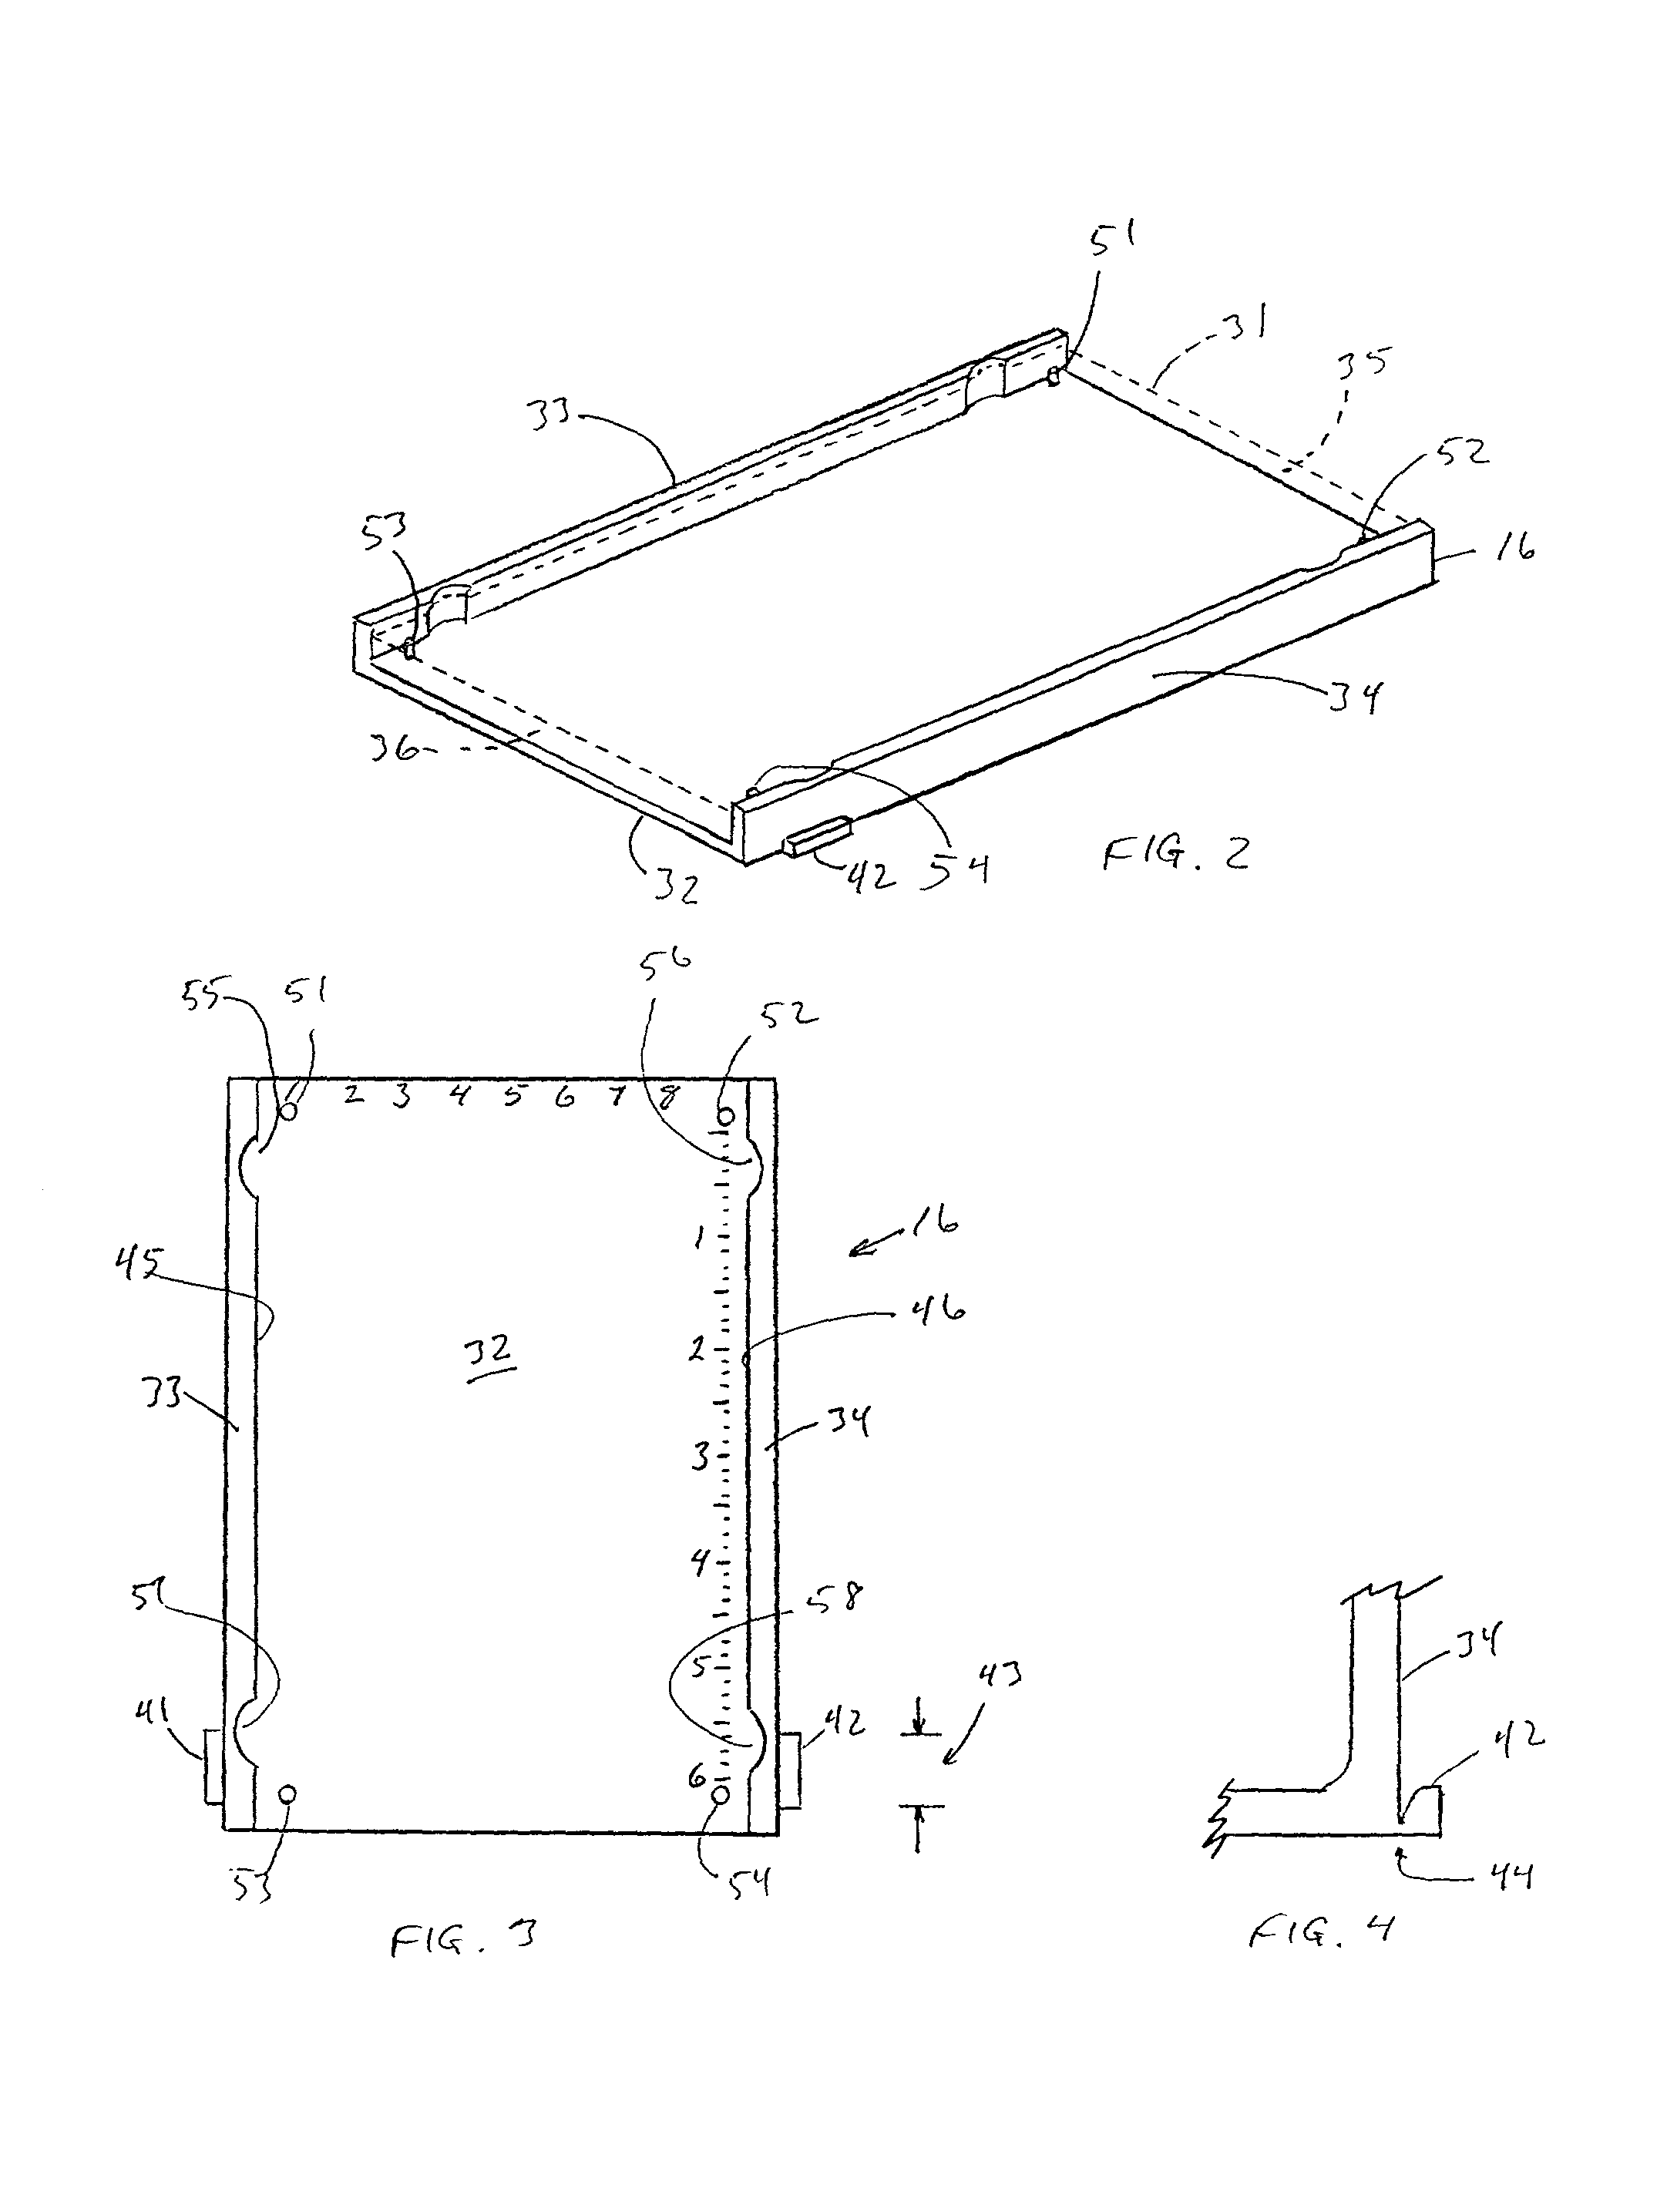 Precast gel and tray combination for submerged gel electrophoresis